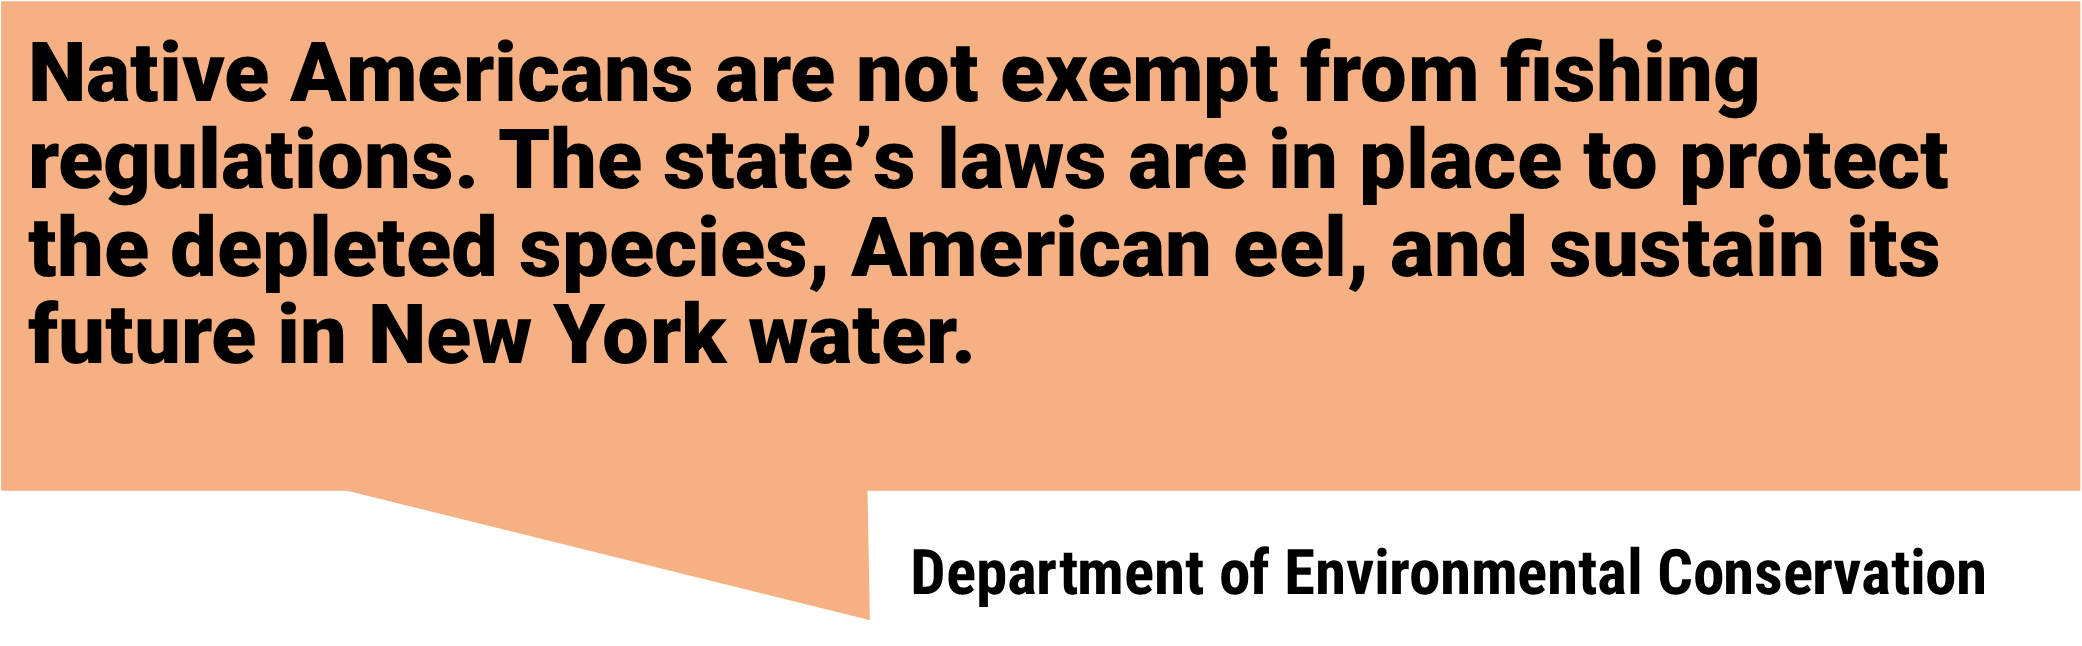 The department of environmental conservation says: Native Americans are not exempt from fishing regulations. The state’s laws are in place to protect the depleted species, American eel, and sustain its future in New York water.